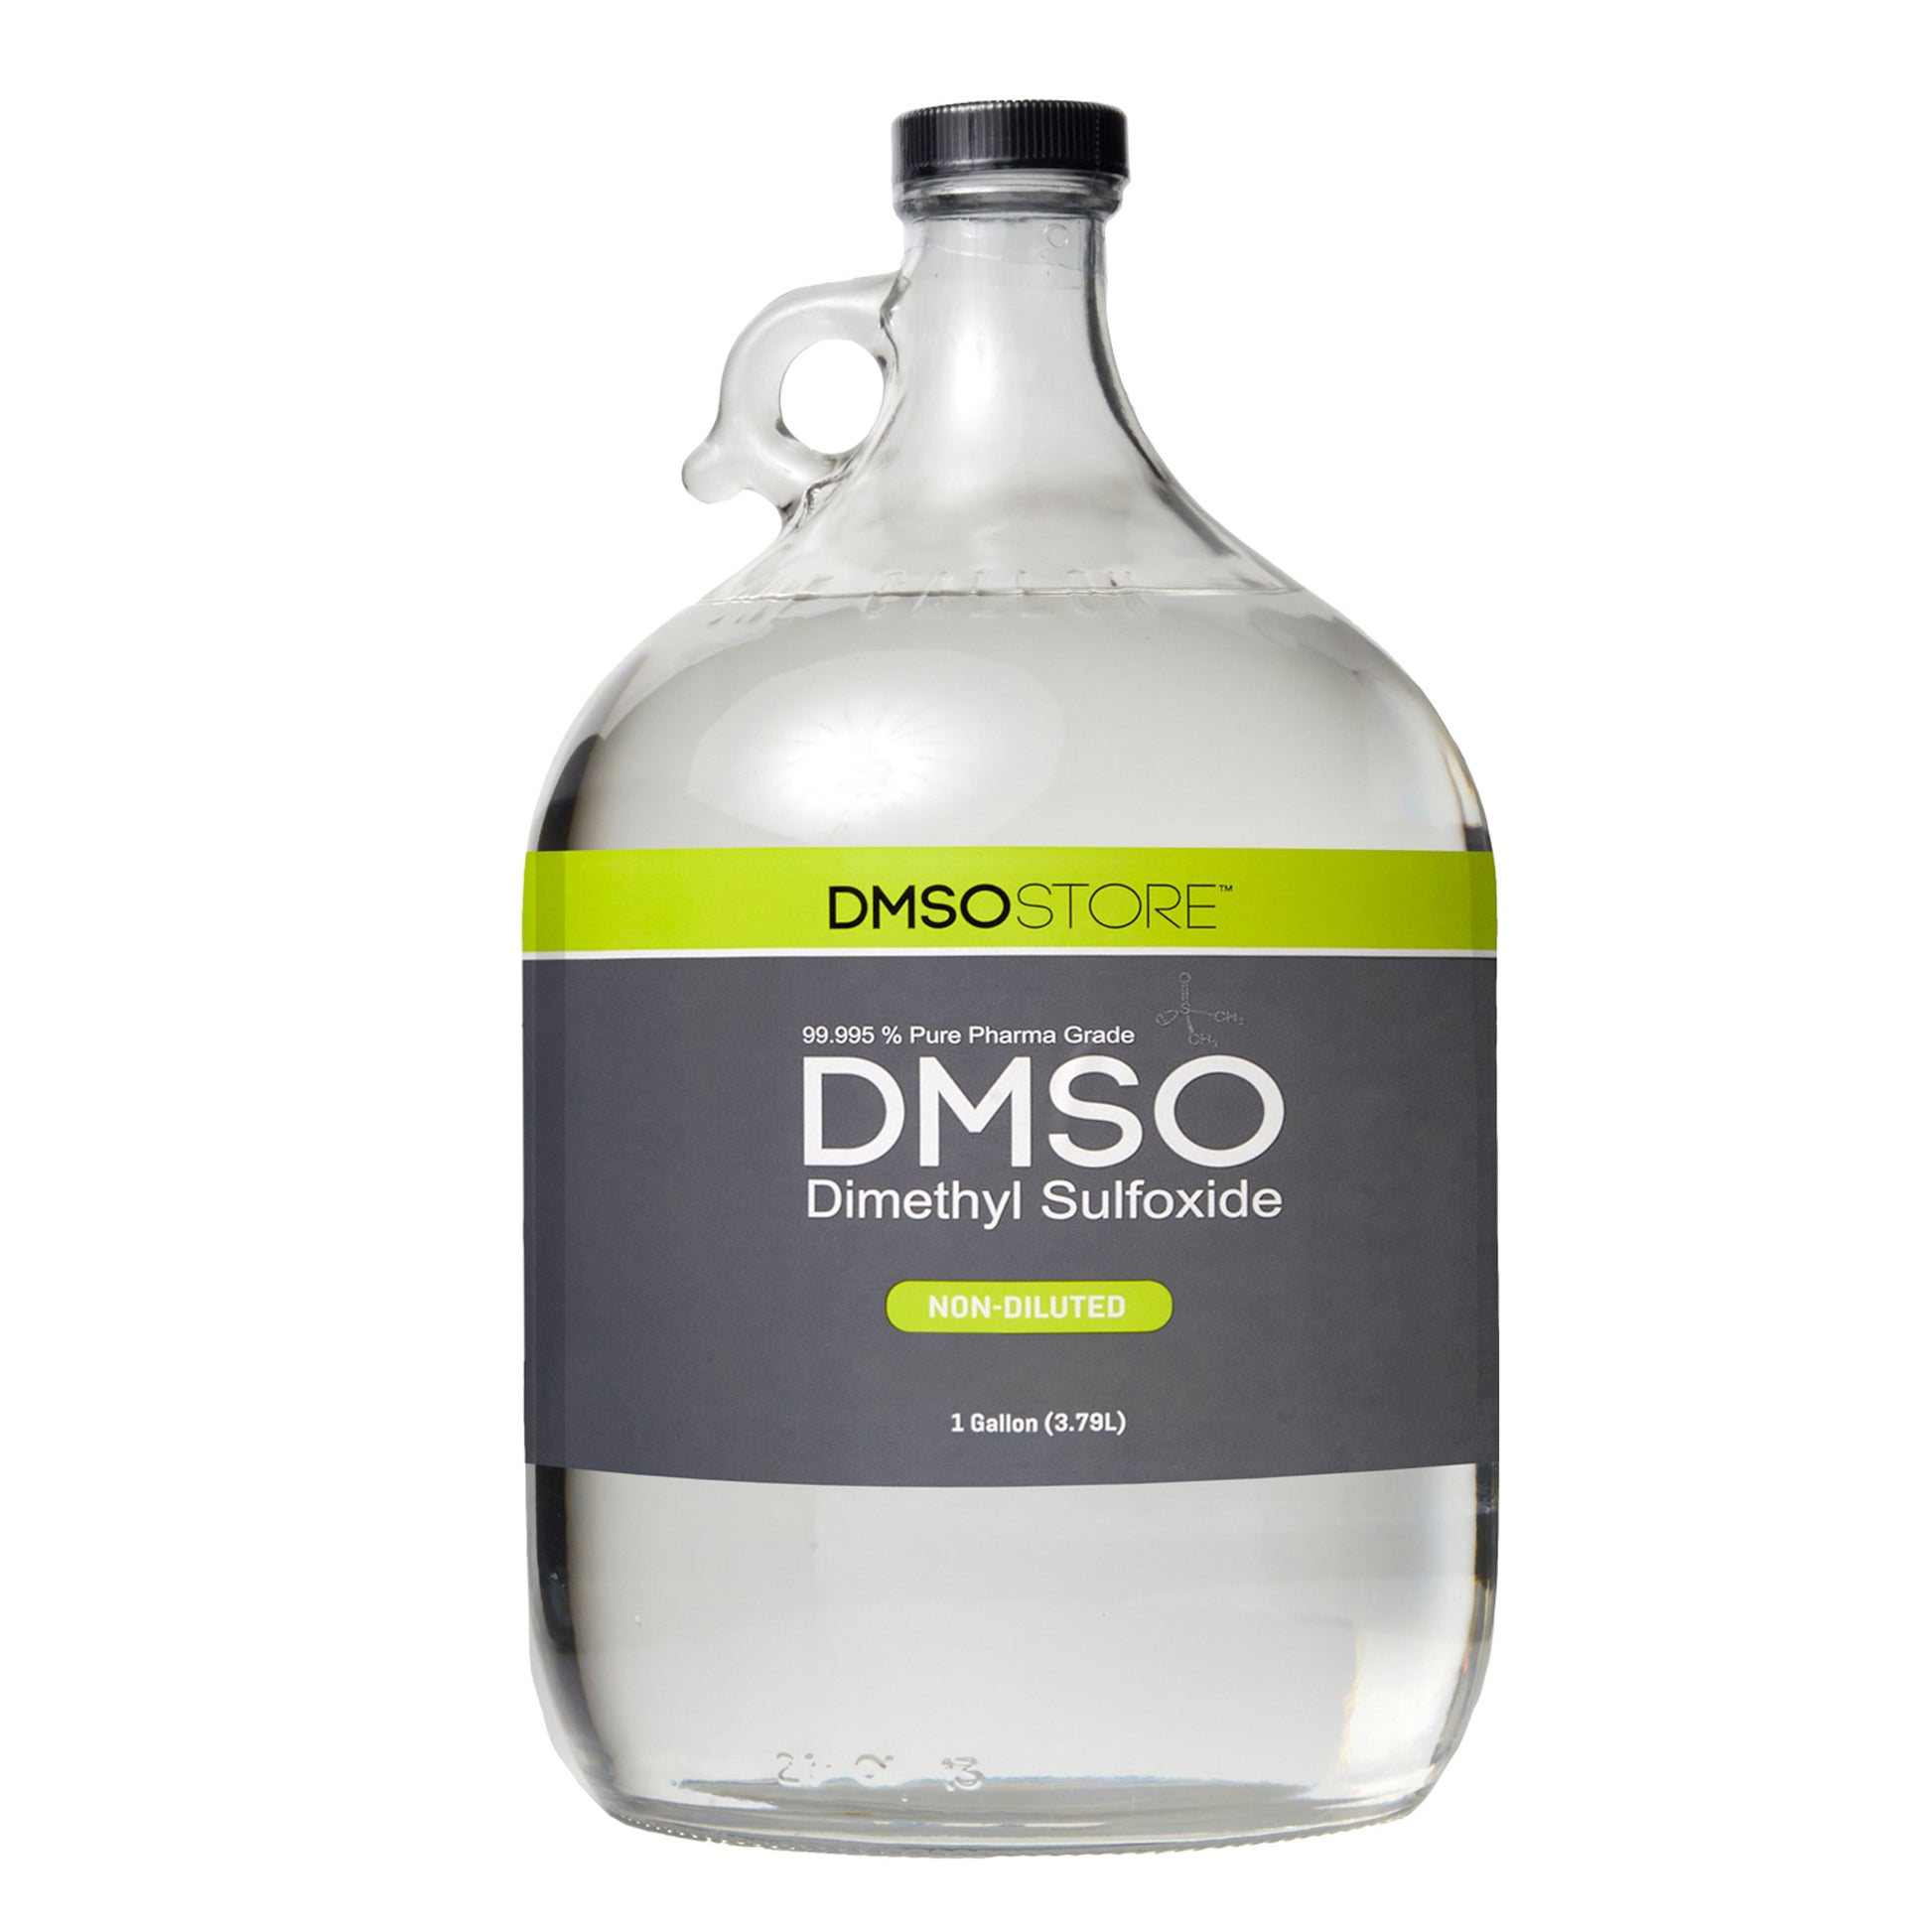 one gallon glass jug with handle. Black twist on cap attached to jug. Label reads 99.995% Pure pharma Grade DMSO (Dimethyl Sulfoxide) 1 Gallon.